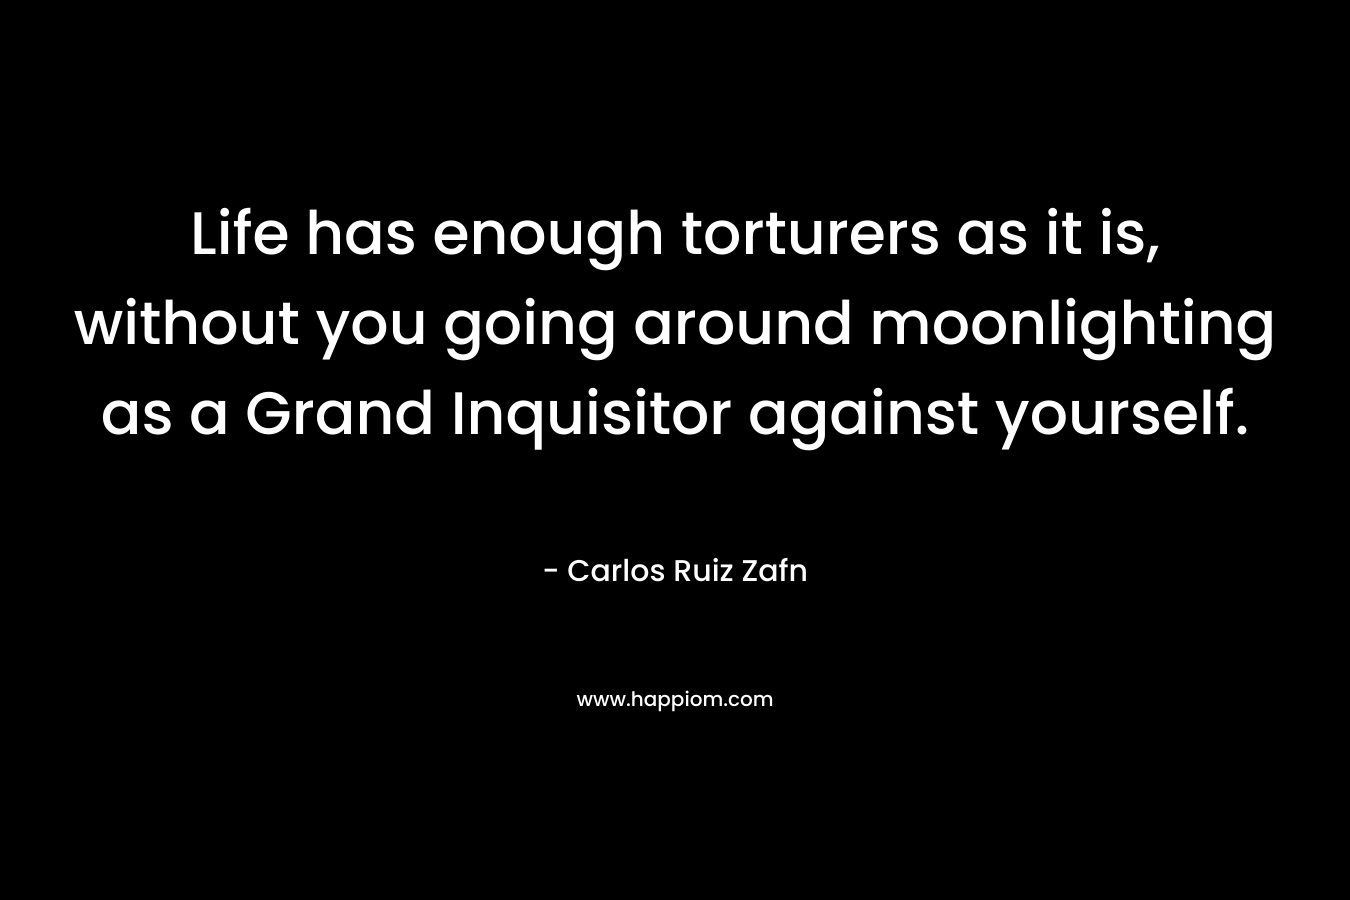 Life has enough torturers as it is, without you going around moonlighting as a Grand Inquisitor against yourself. – Carlos Ruiz Zafn